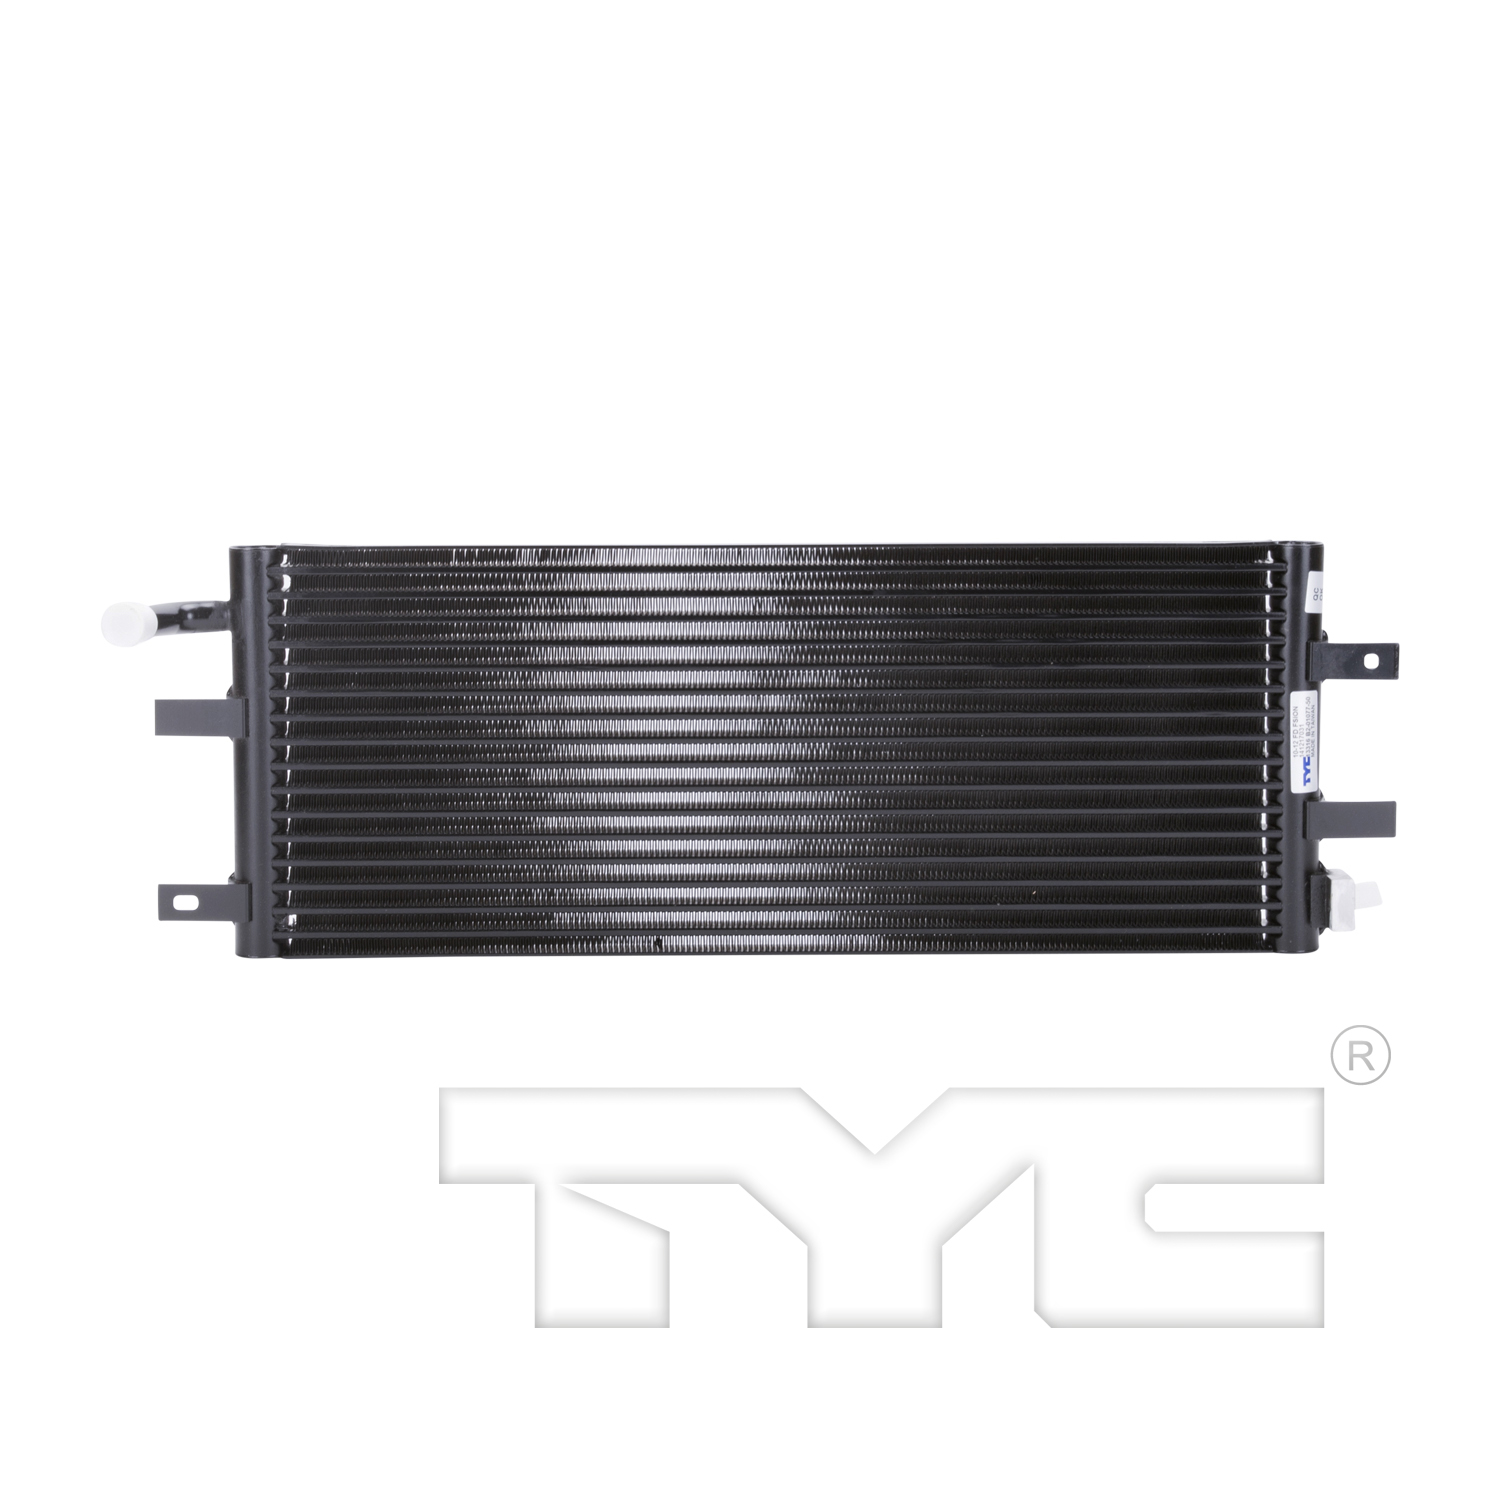 Aftermarket RADIATORS for FORD - FUSION, FUSION,10-12,Inverter cooler